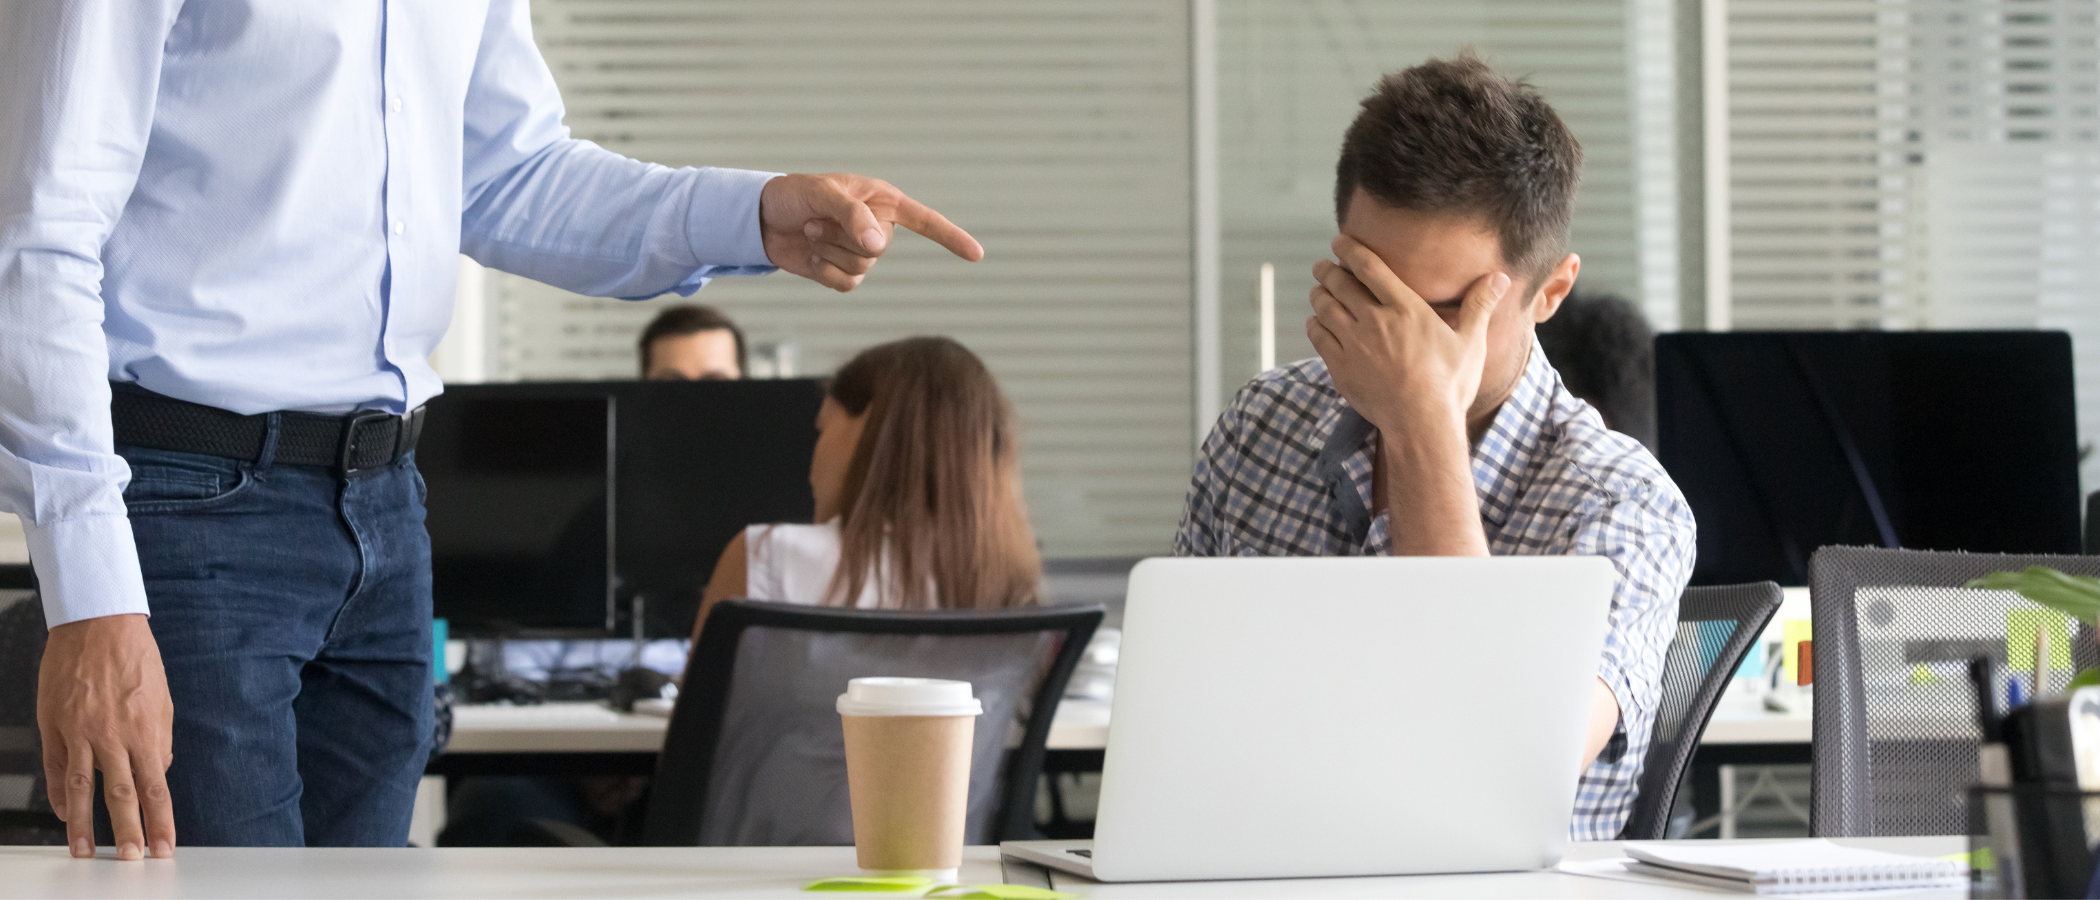 11 Types of Workplace Harassment (And How to Stop Them)